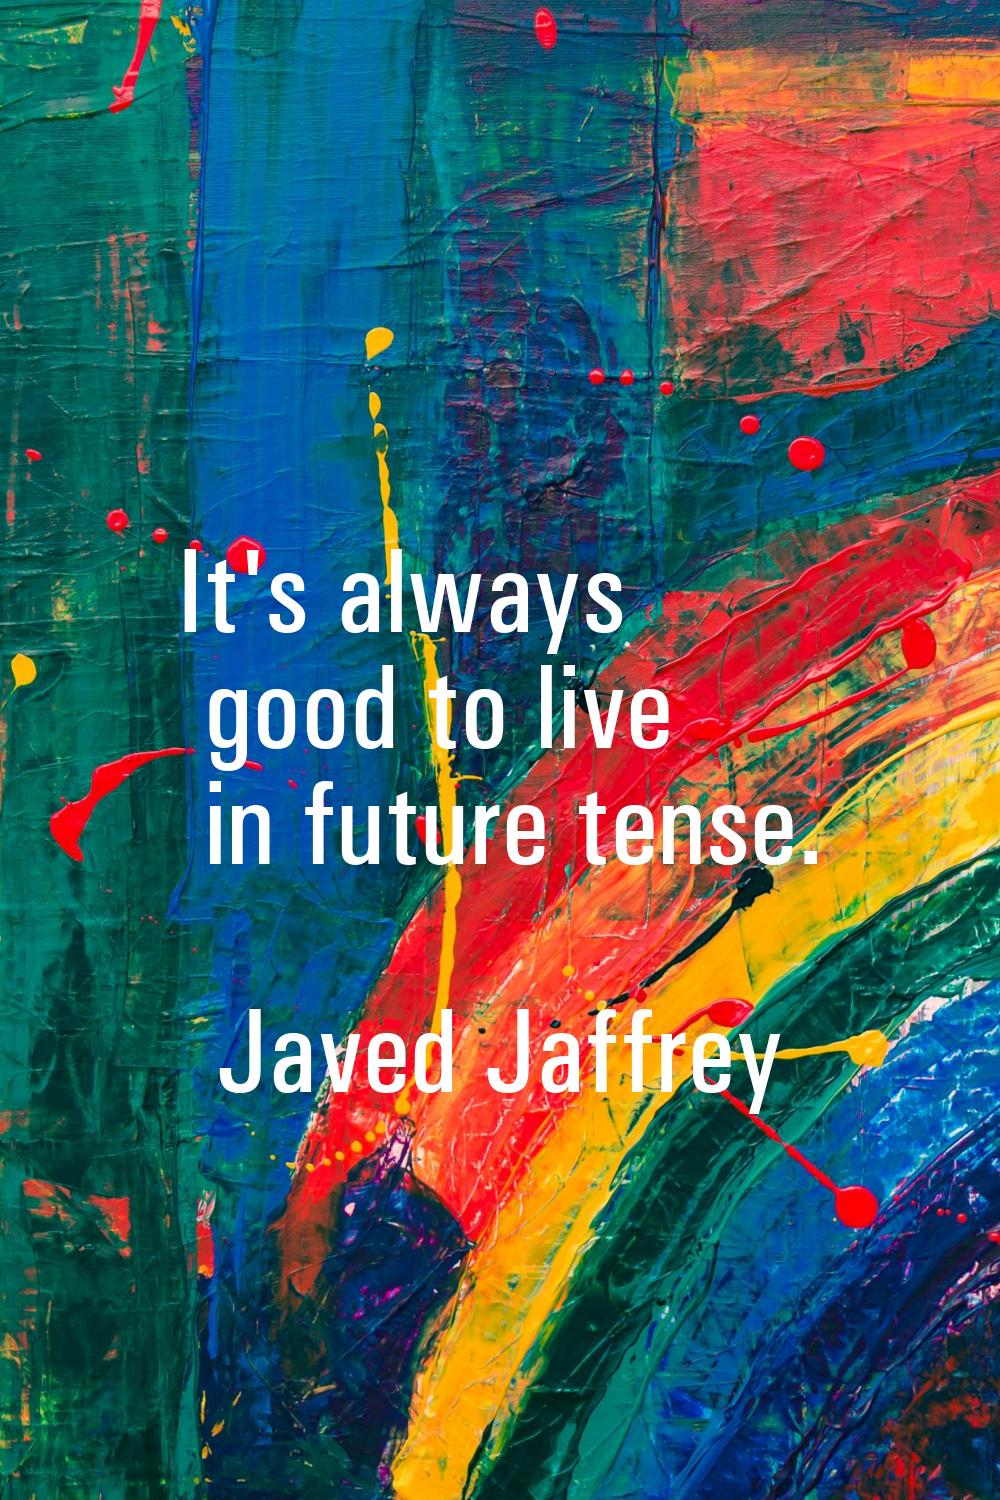 It's always good to live in future tense.